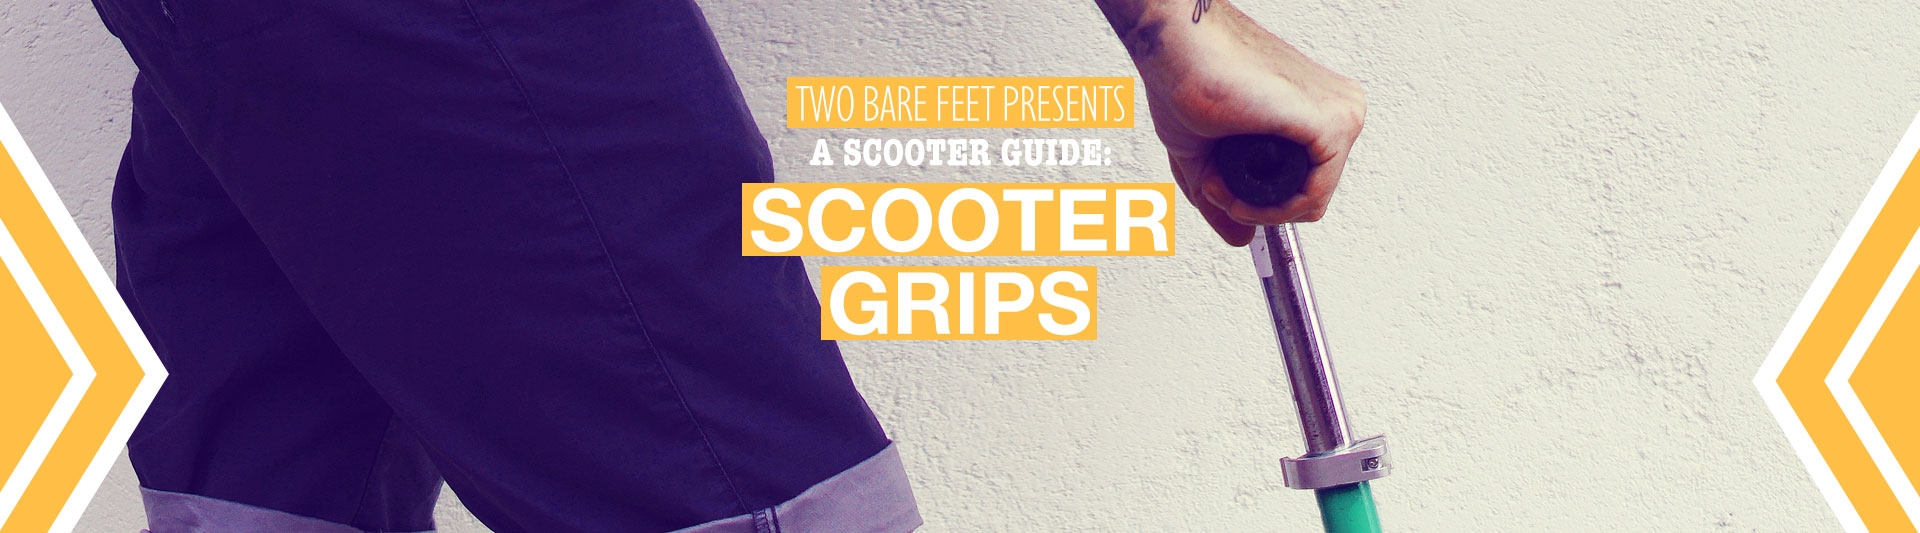 Scooter Grips banner